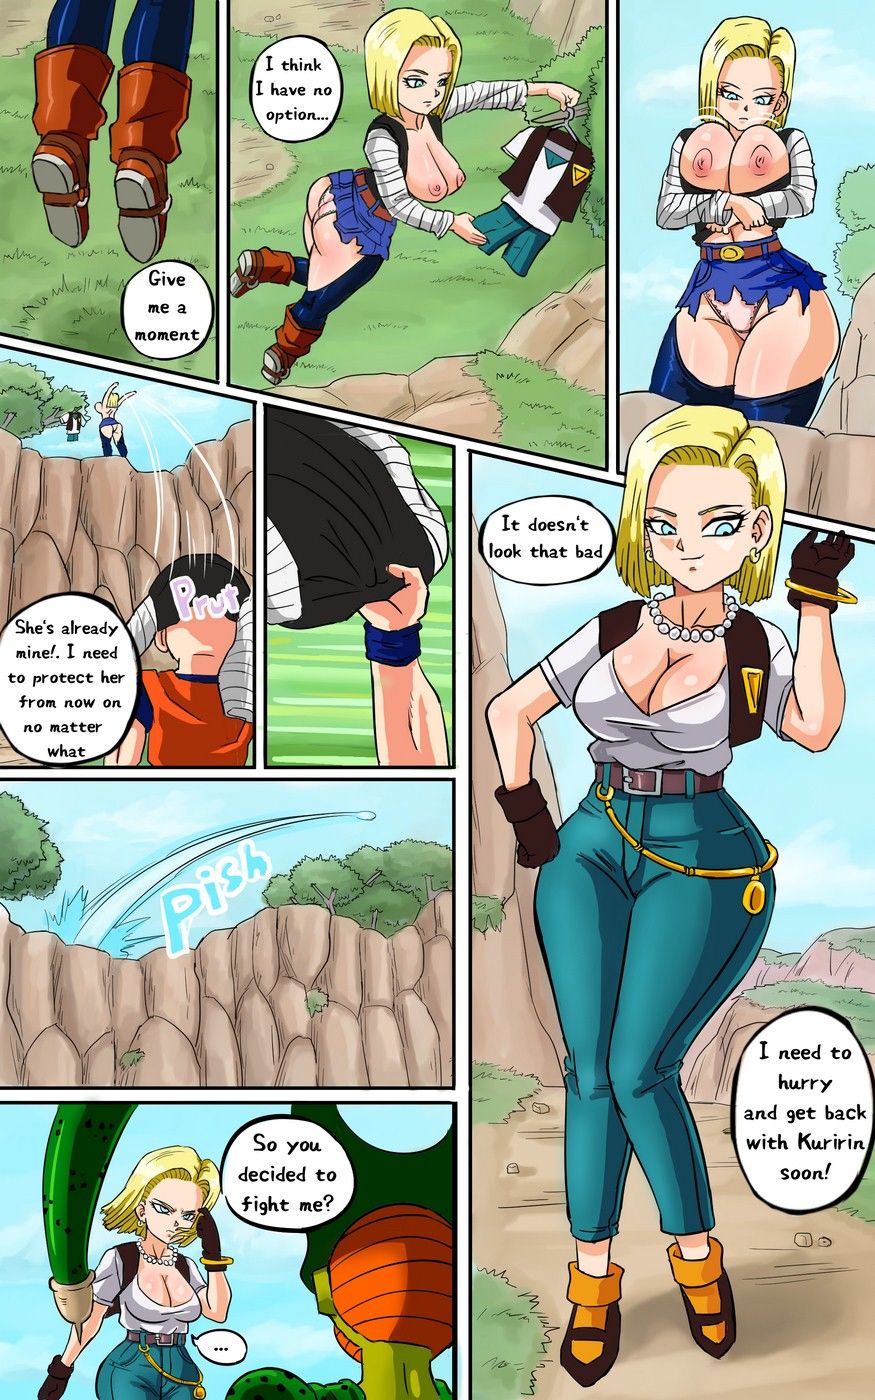 Android 18 meets Krillin (Dragon Ball Z) by Pink Pawg page 7